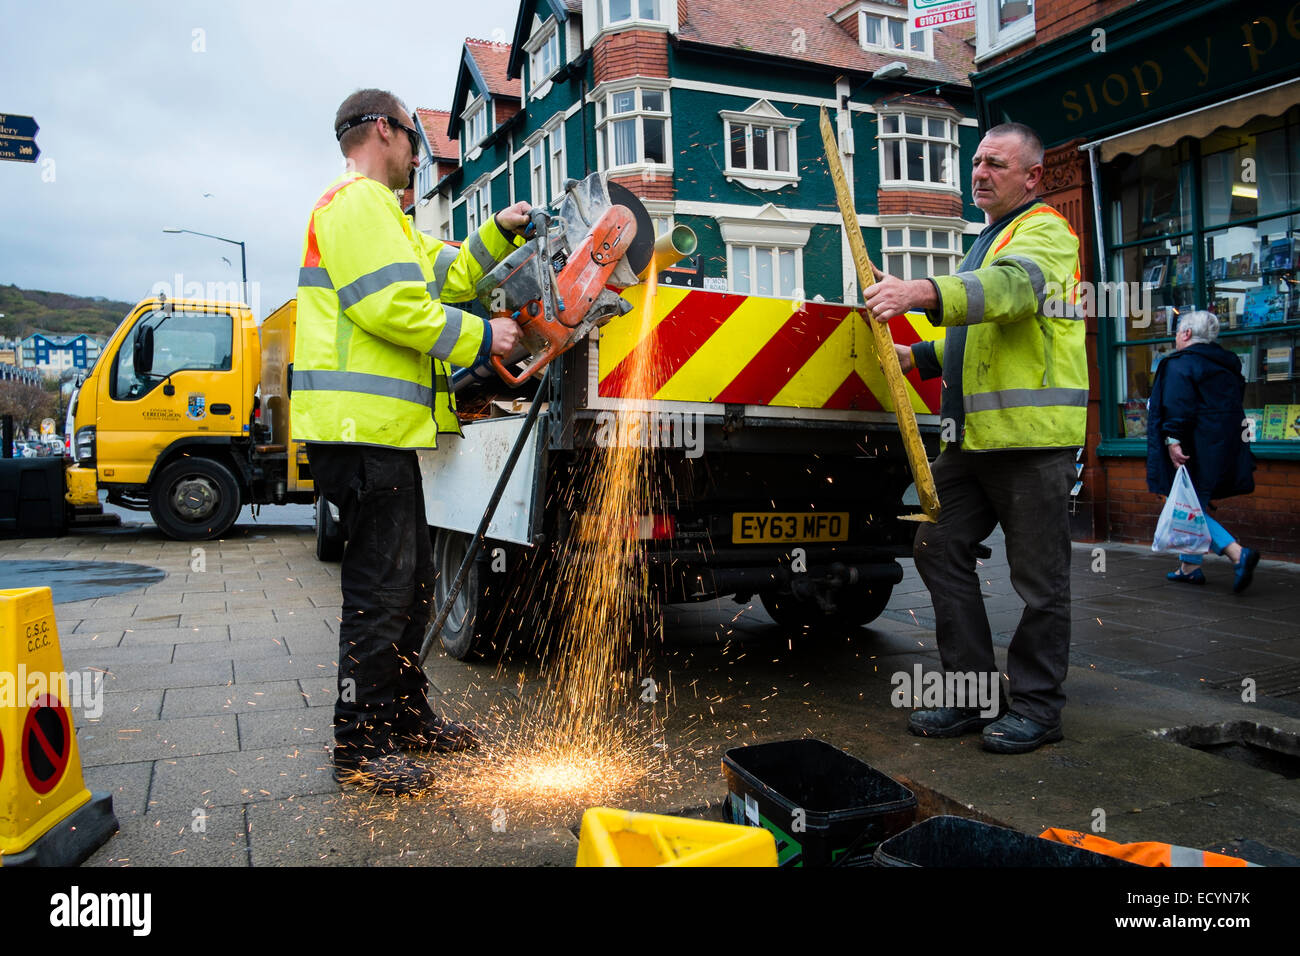 A two-man crew of Ceredigion County Council local authority direct labour workers wearing hi-vis yellow jackets cutting a metal pole with an angle grinder in the street, Aberystwyth Wales UK Stock Photo